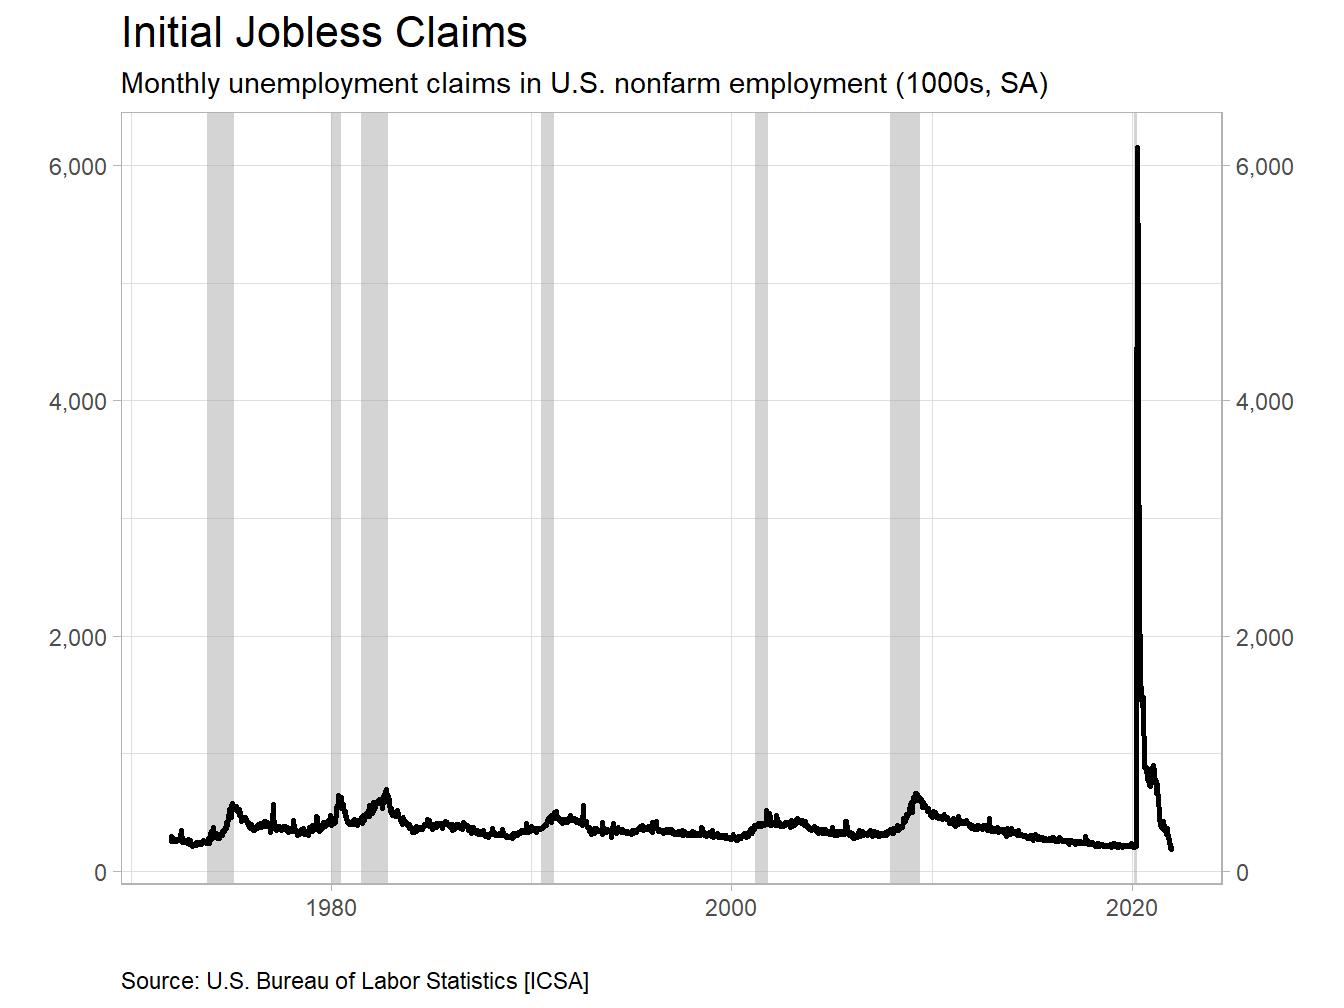 Jobless Claims Skyrocket in 2020